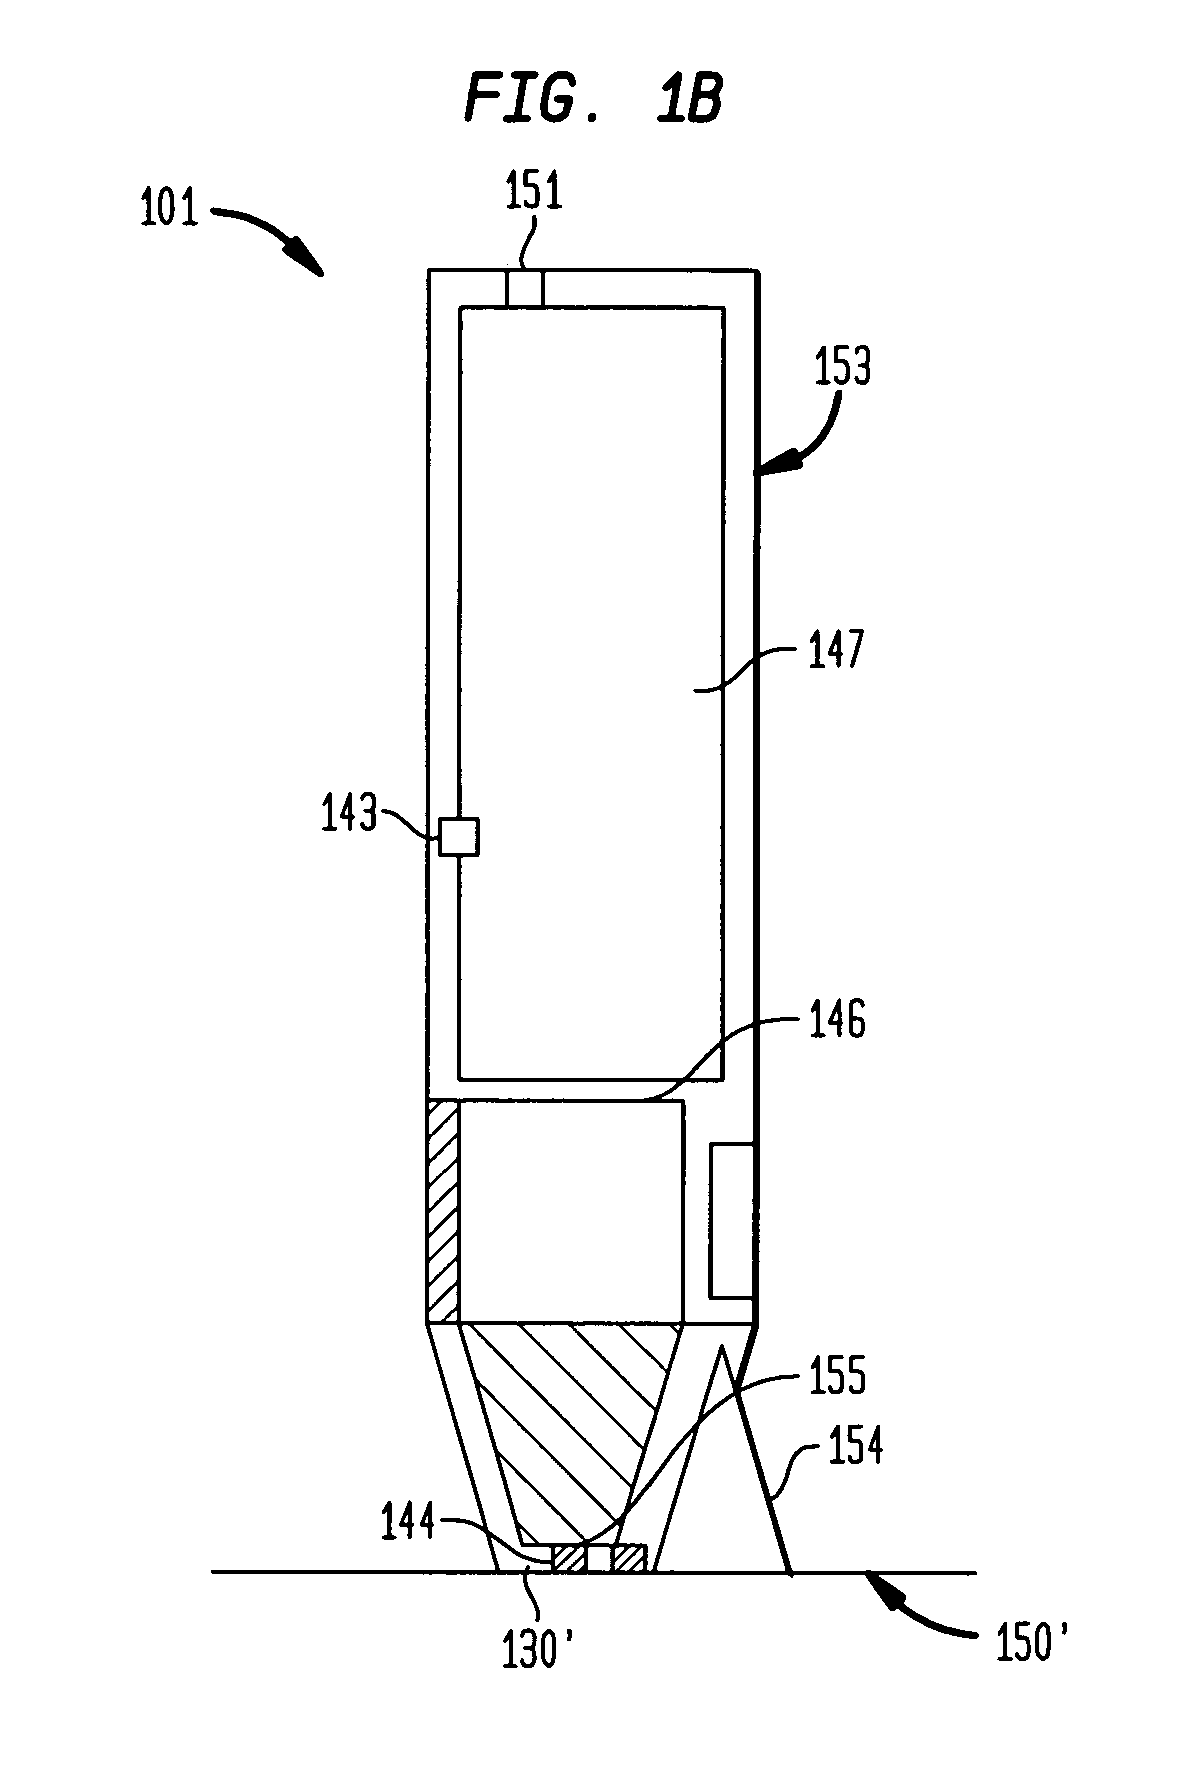 Phototreatment device for use with coolants and topical substances